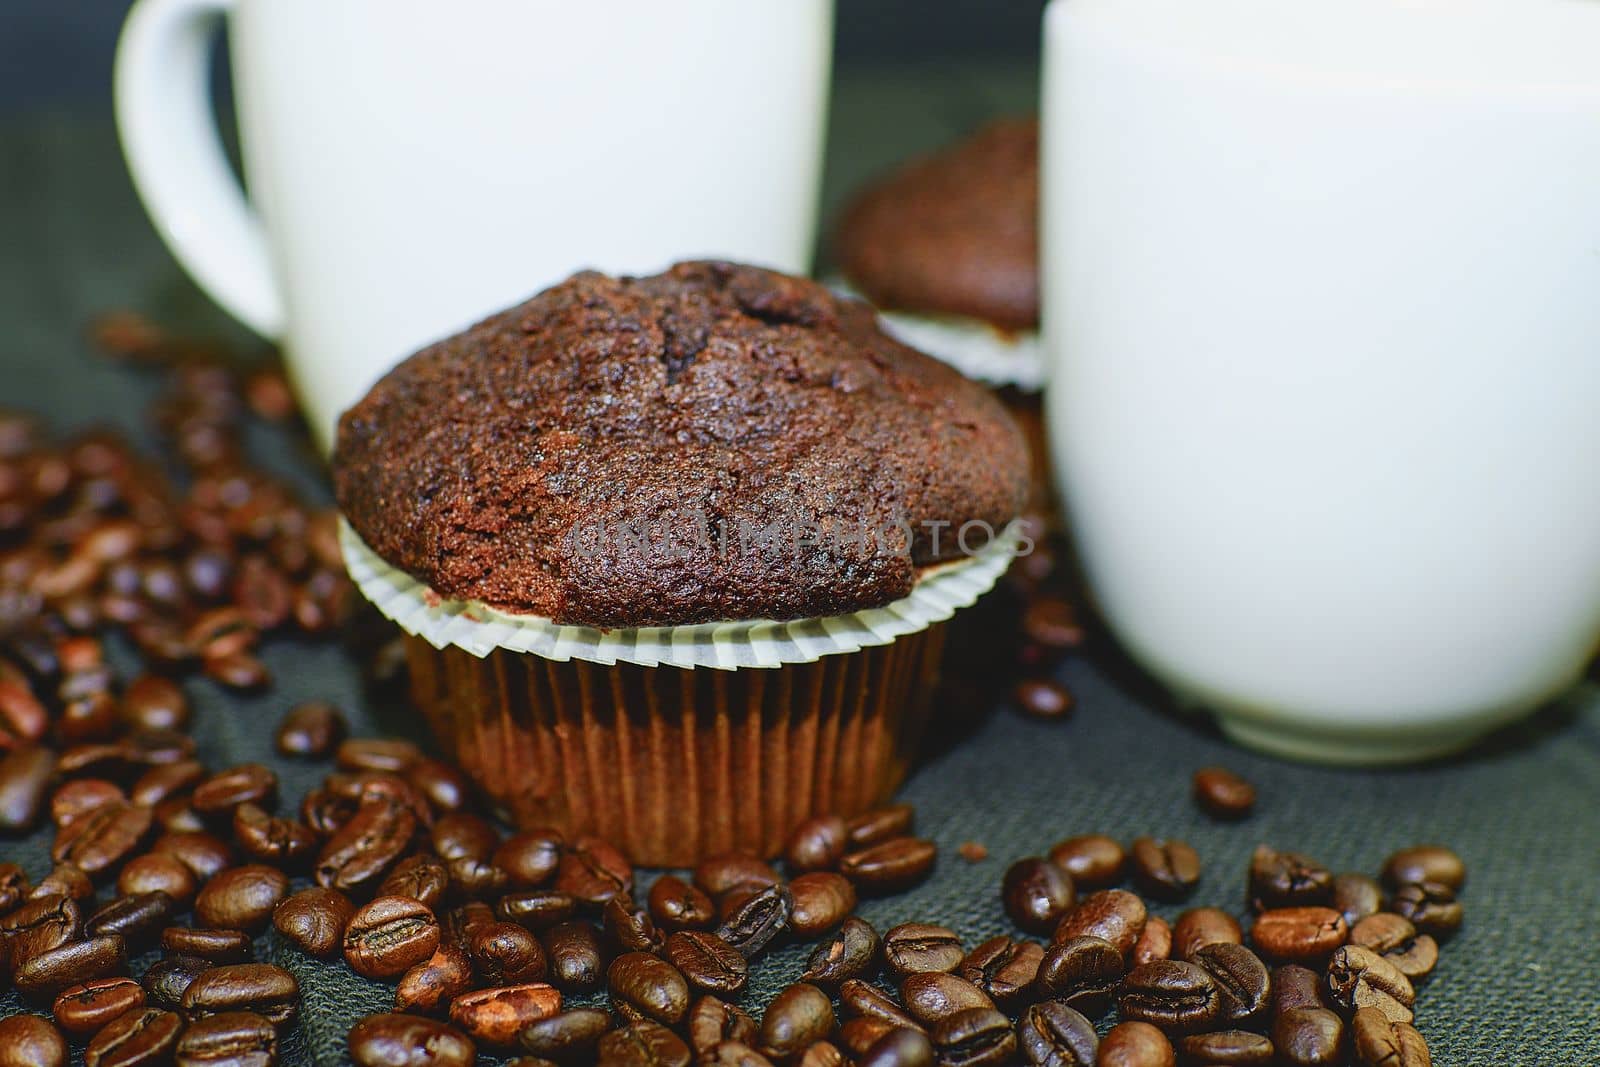 Dark muffins, cups of coffee and coffee beans on black background